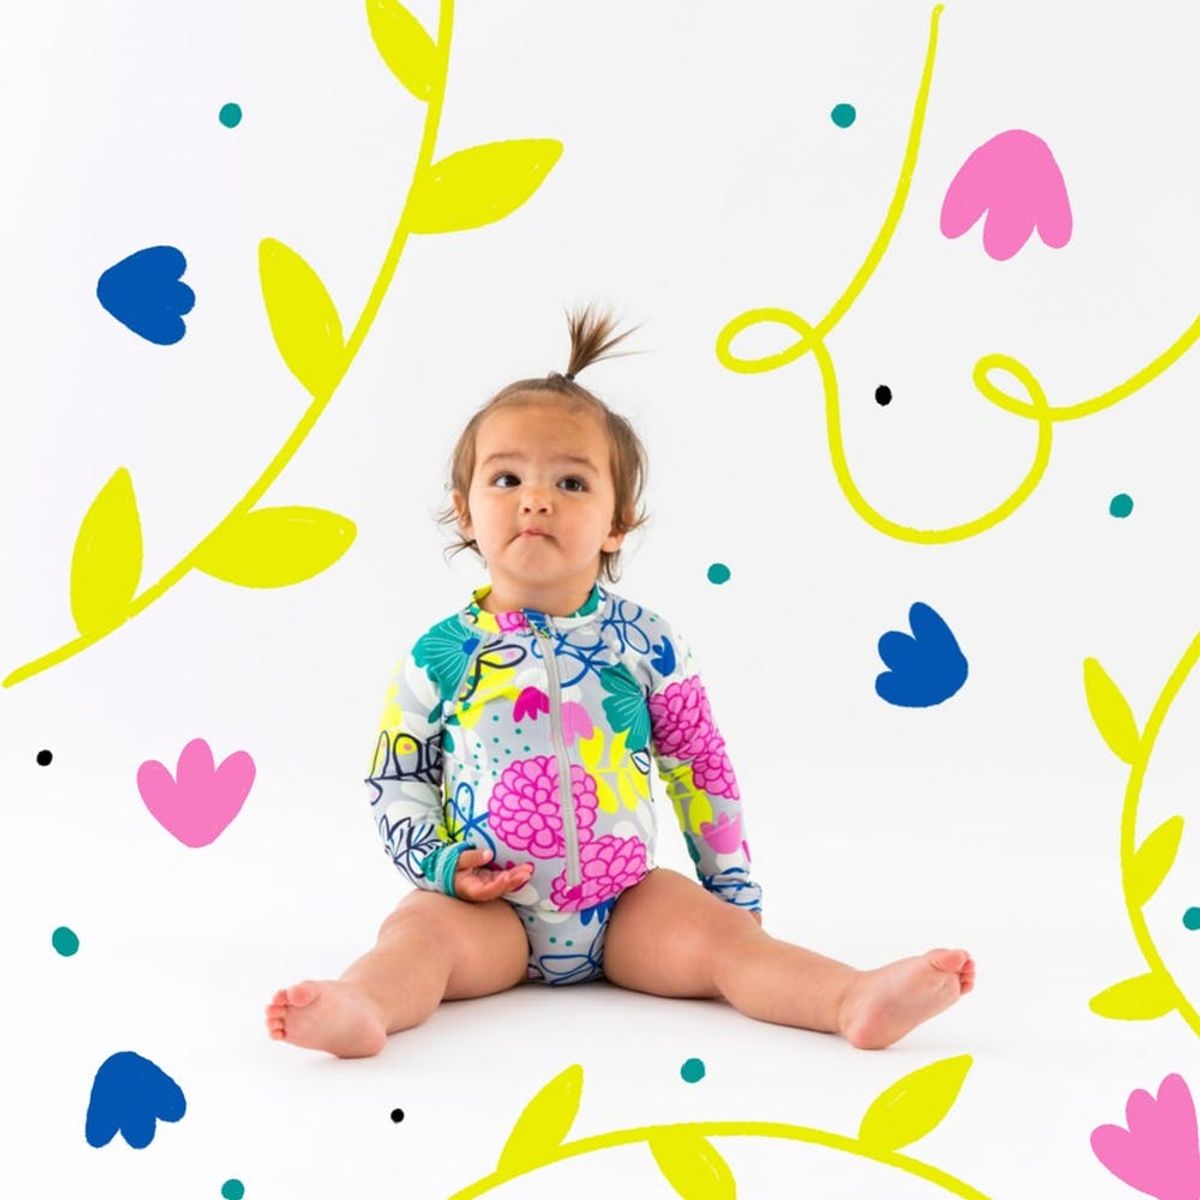 10 Playful Summer Prints for Kids We Wish Came in Grown-Up Sizes